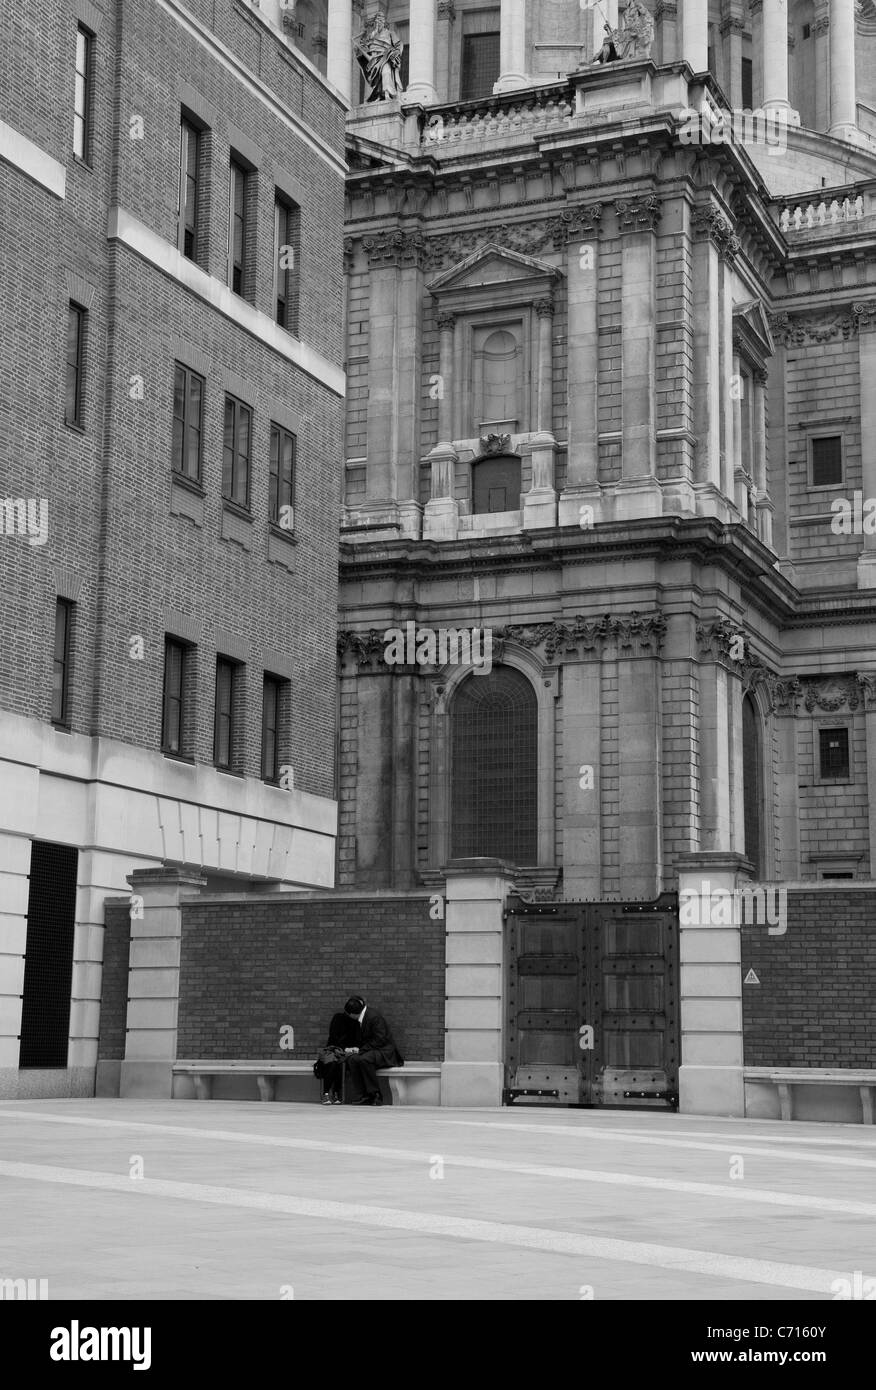 A couple kissing on a seat by the famous London landmark St Paul's Stock Photo